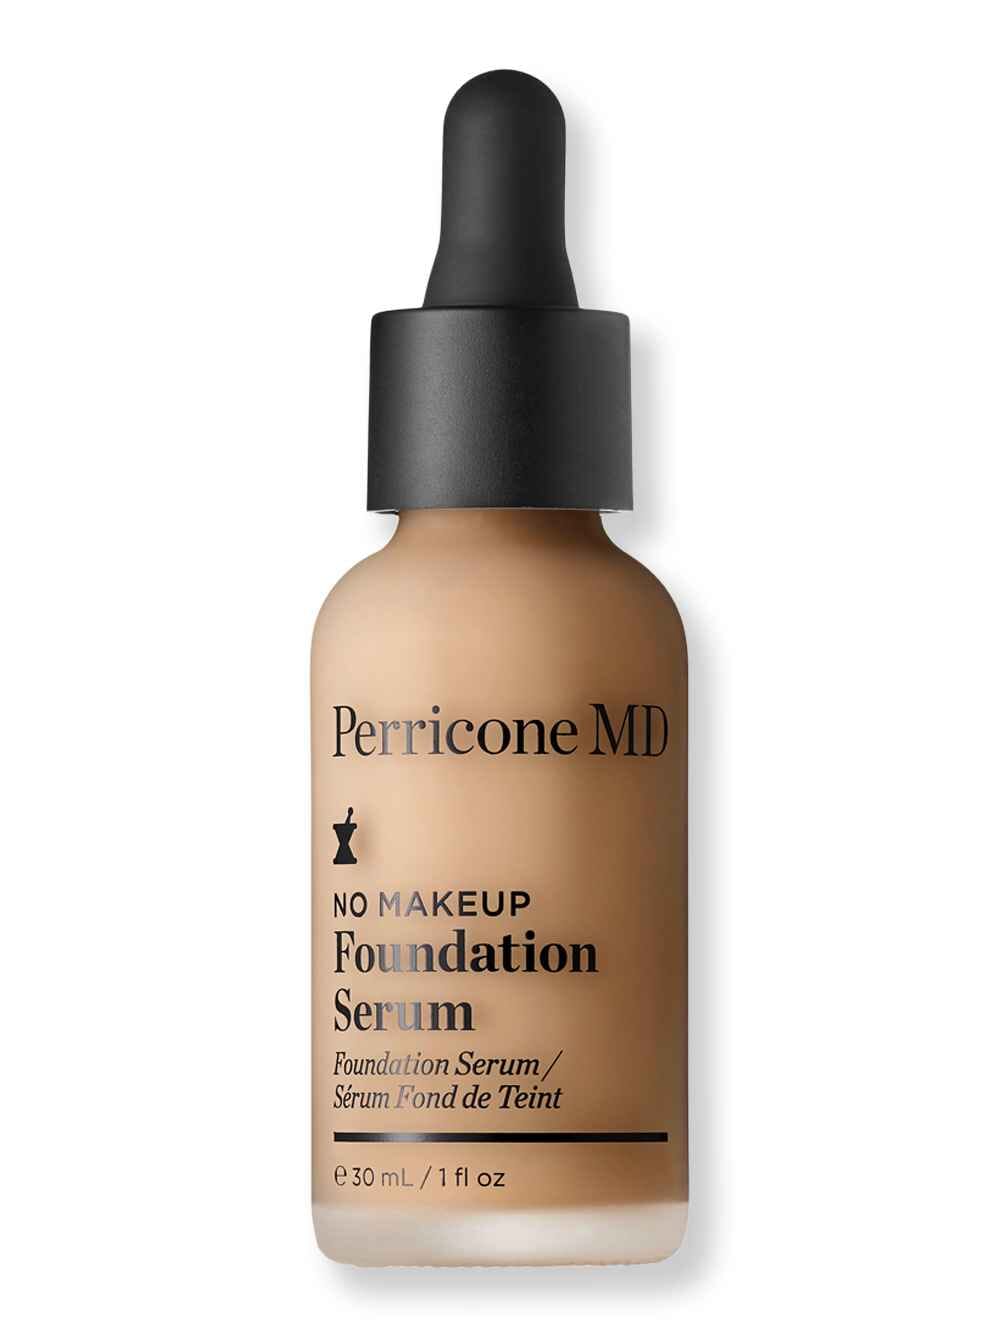 Perricone MD Perricone MD No Makeup Foundation Serum Broad Spectrum SPF 20 Buff 1 oz30 ml Tinted Moisturizers & Foundations 